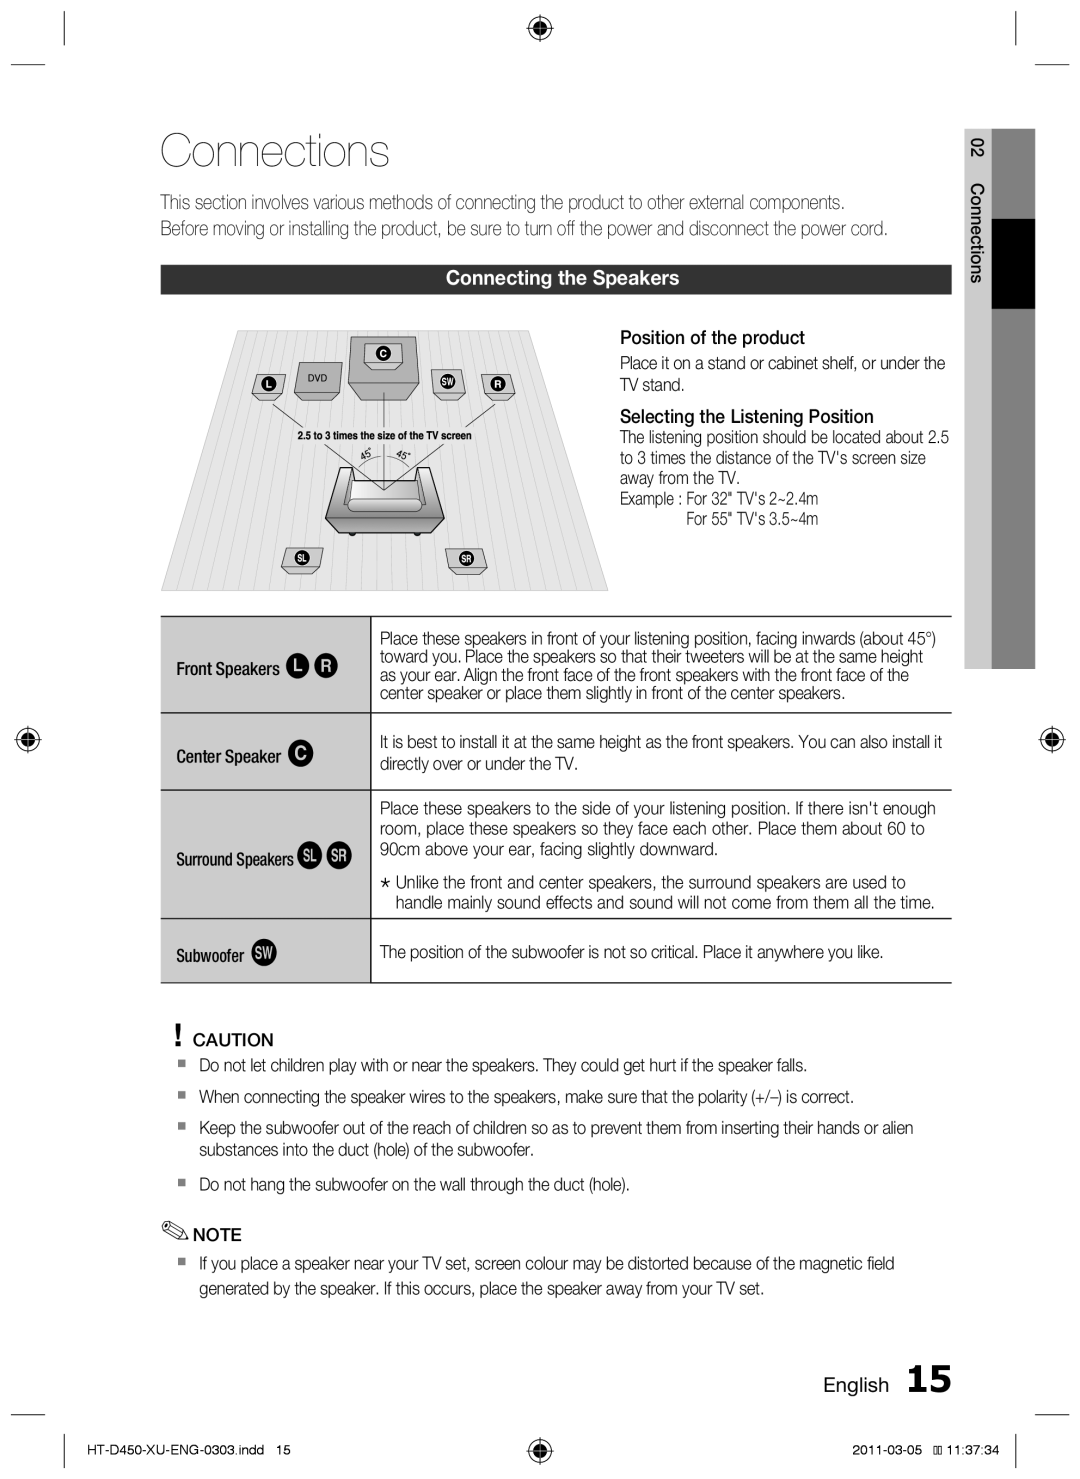 Samsung HT-D450, HT-D455, HT-D453 user manual Connections, Connecting the Speakers, English 